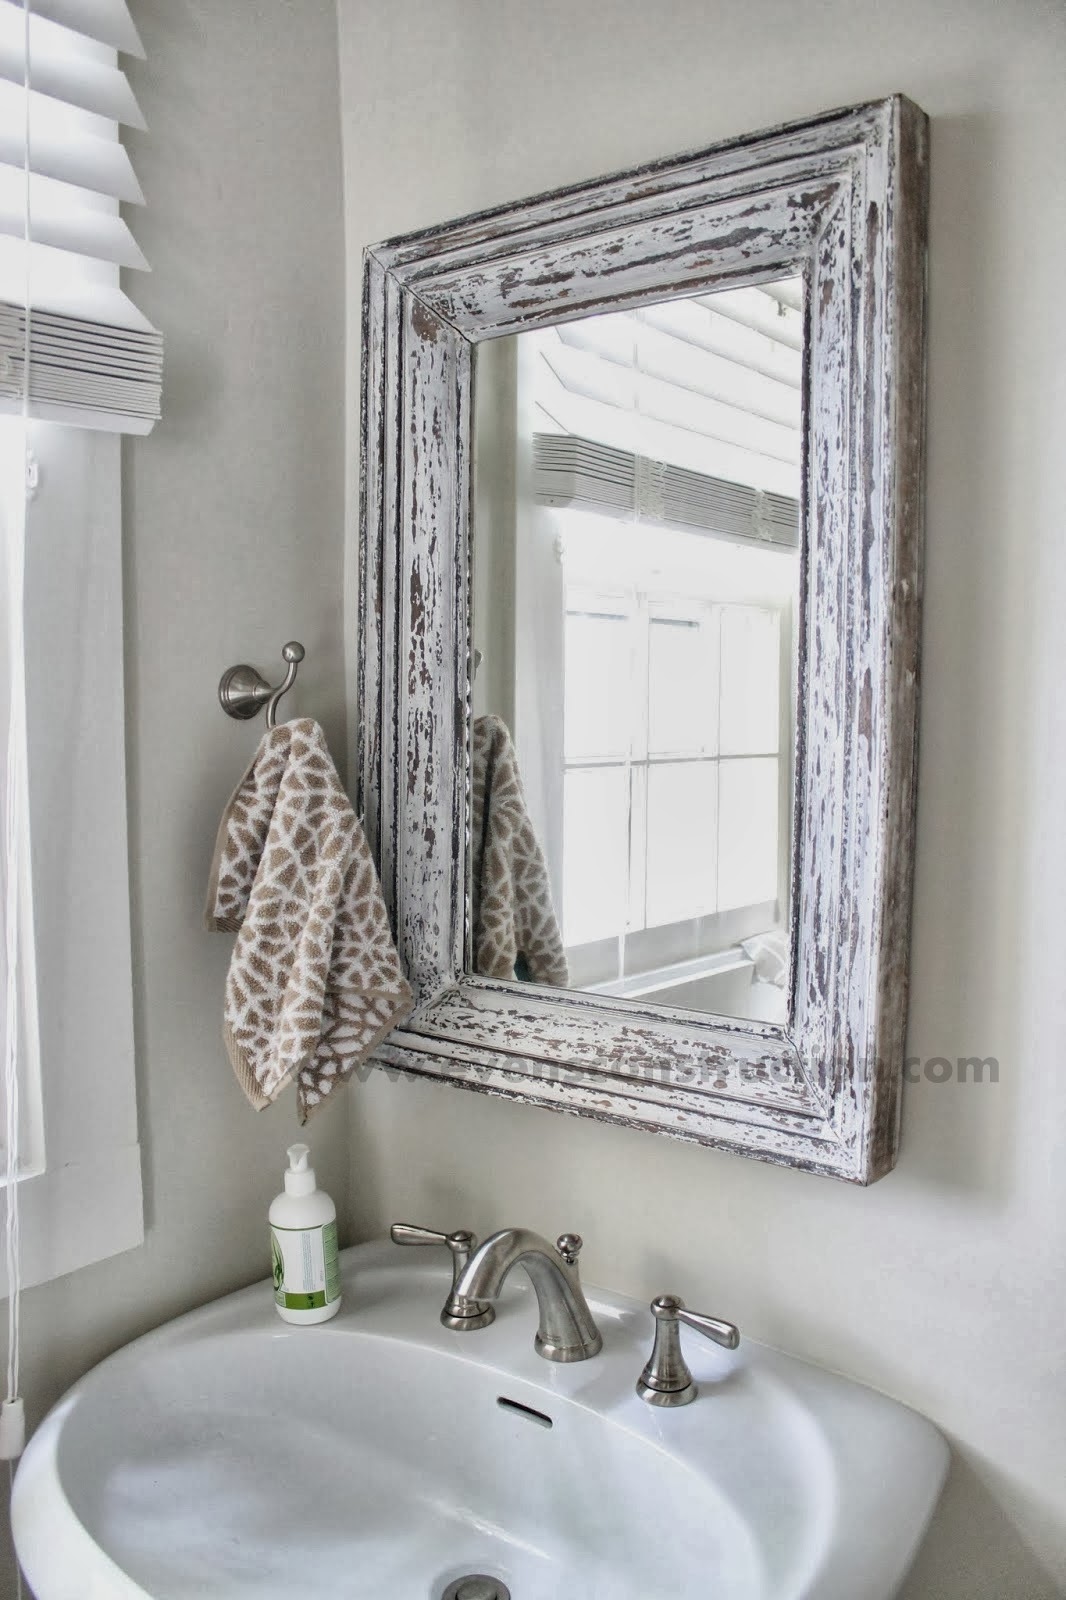 traditional bathroom mirrors Posted by gokul k s at 11:05 AM